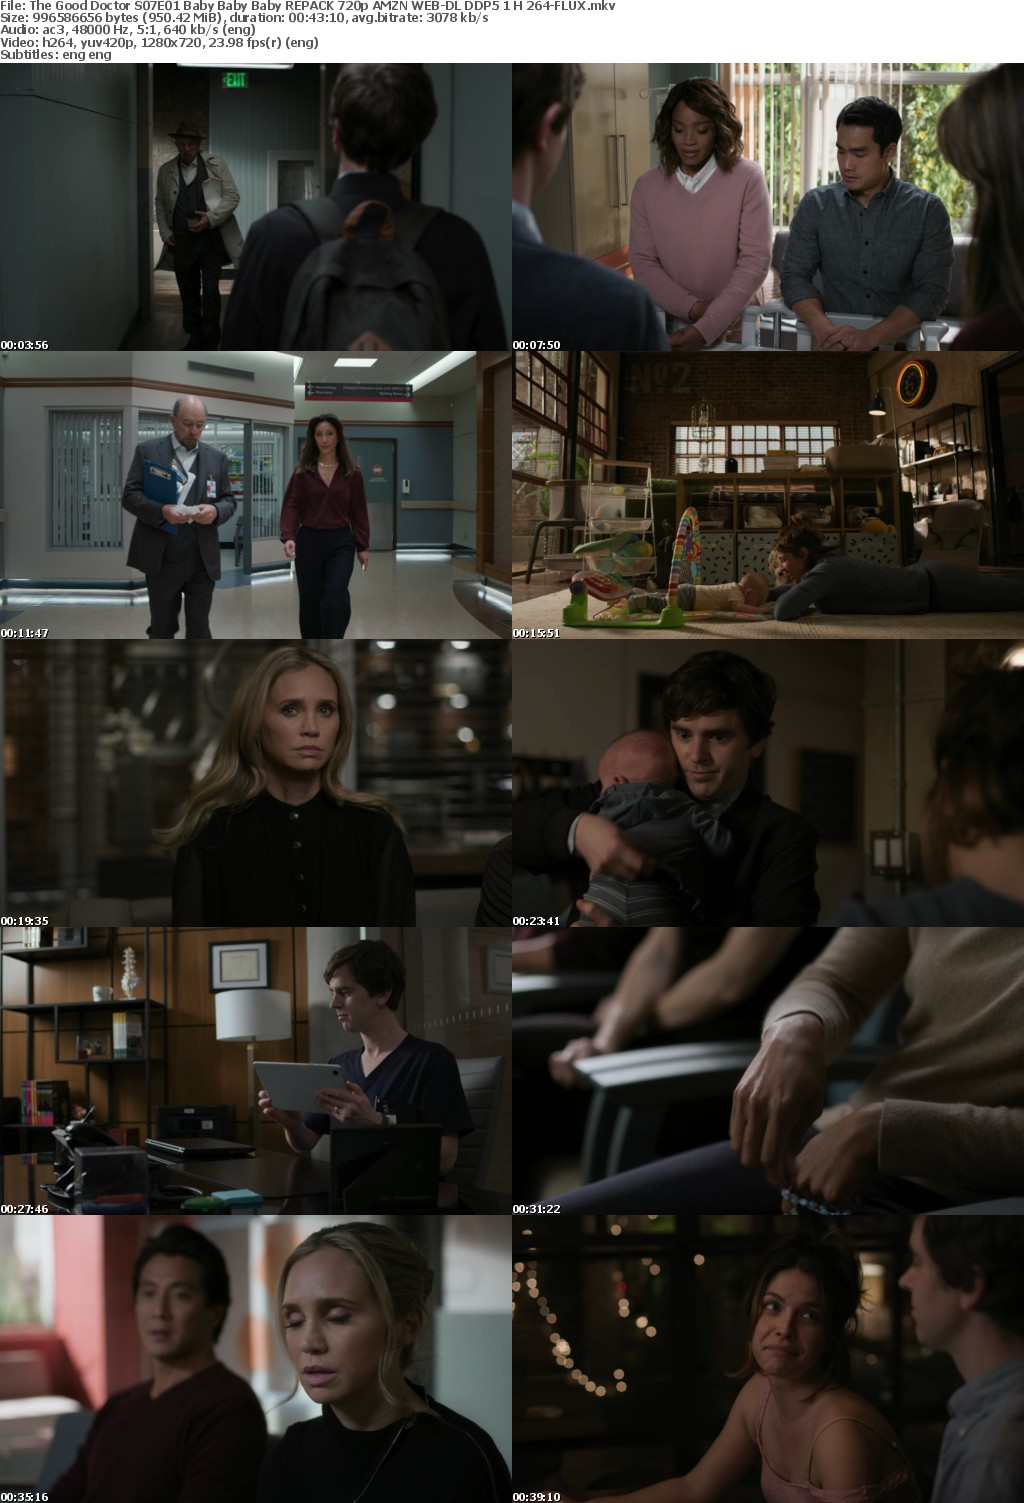 The Good Doctor S07E01 Baby Baby Baby REPACK 720p AMZN WEB-DL DDP5 1 H 264-FLUX